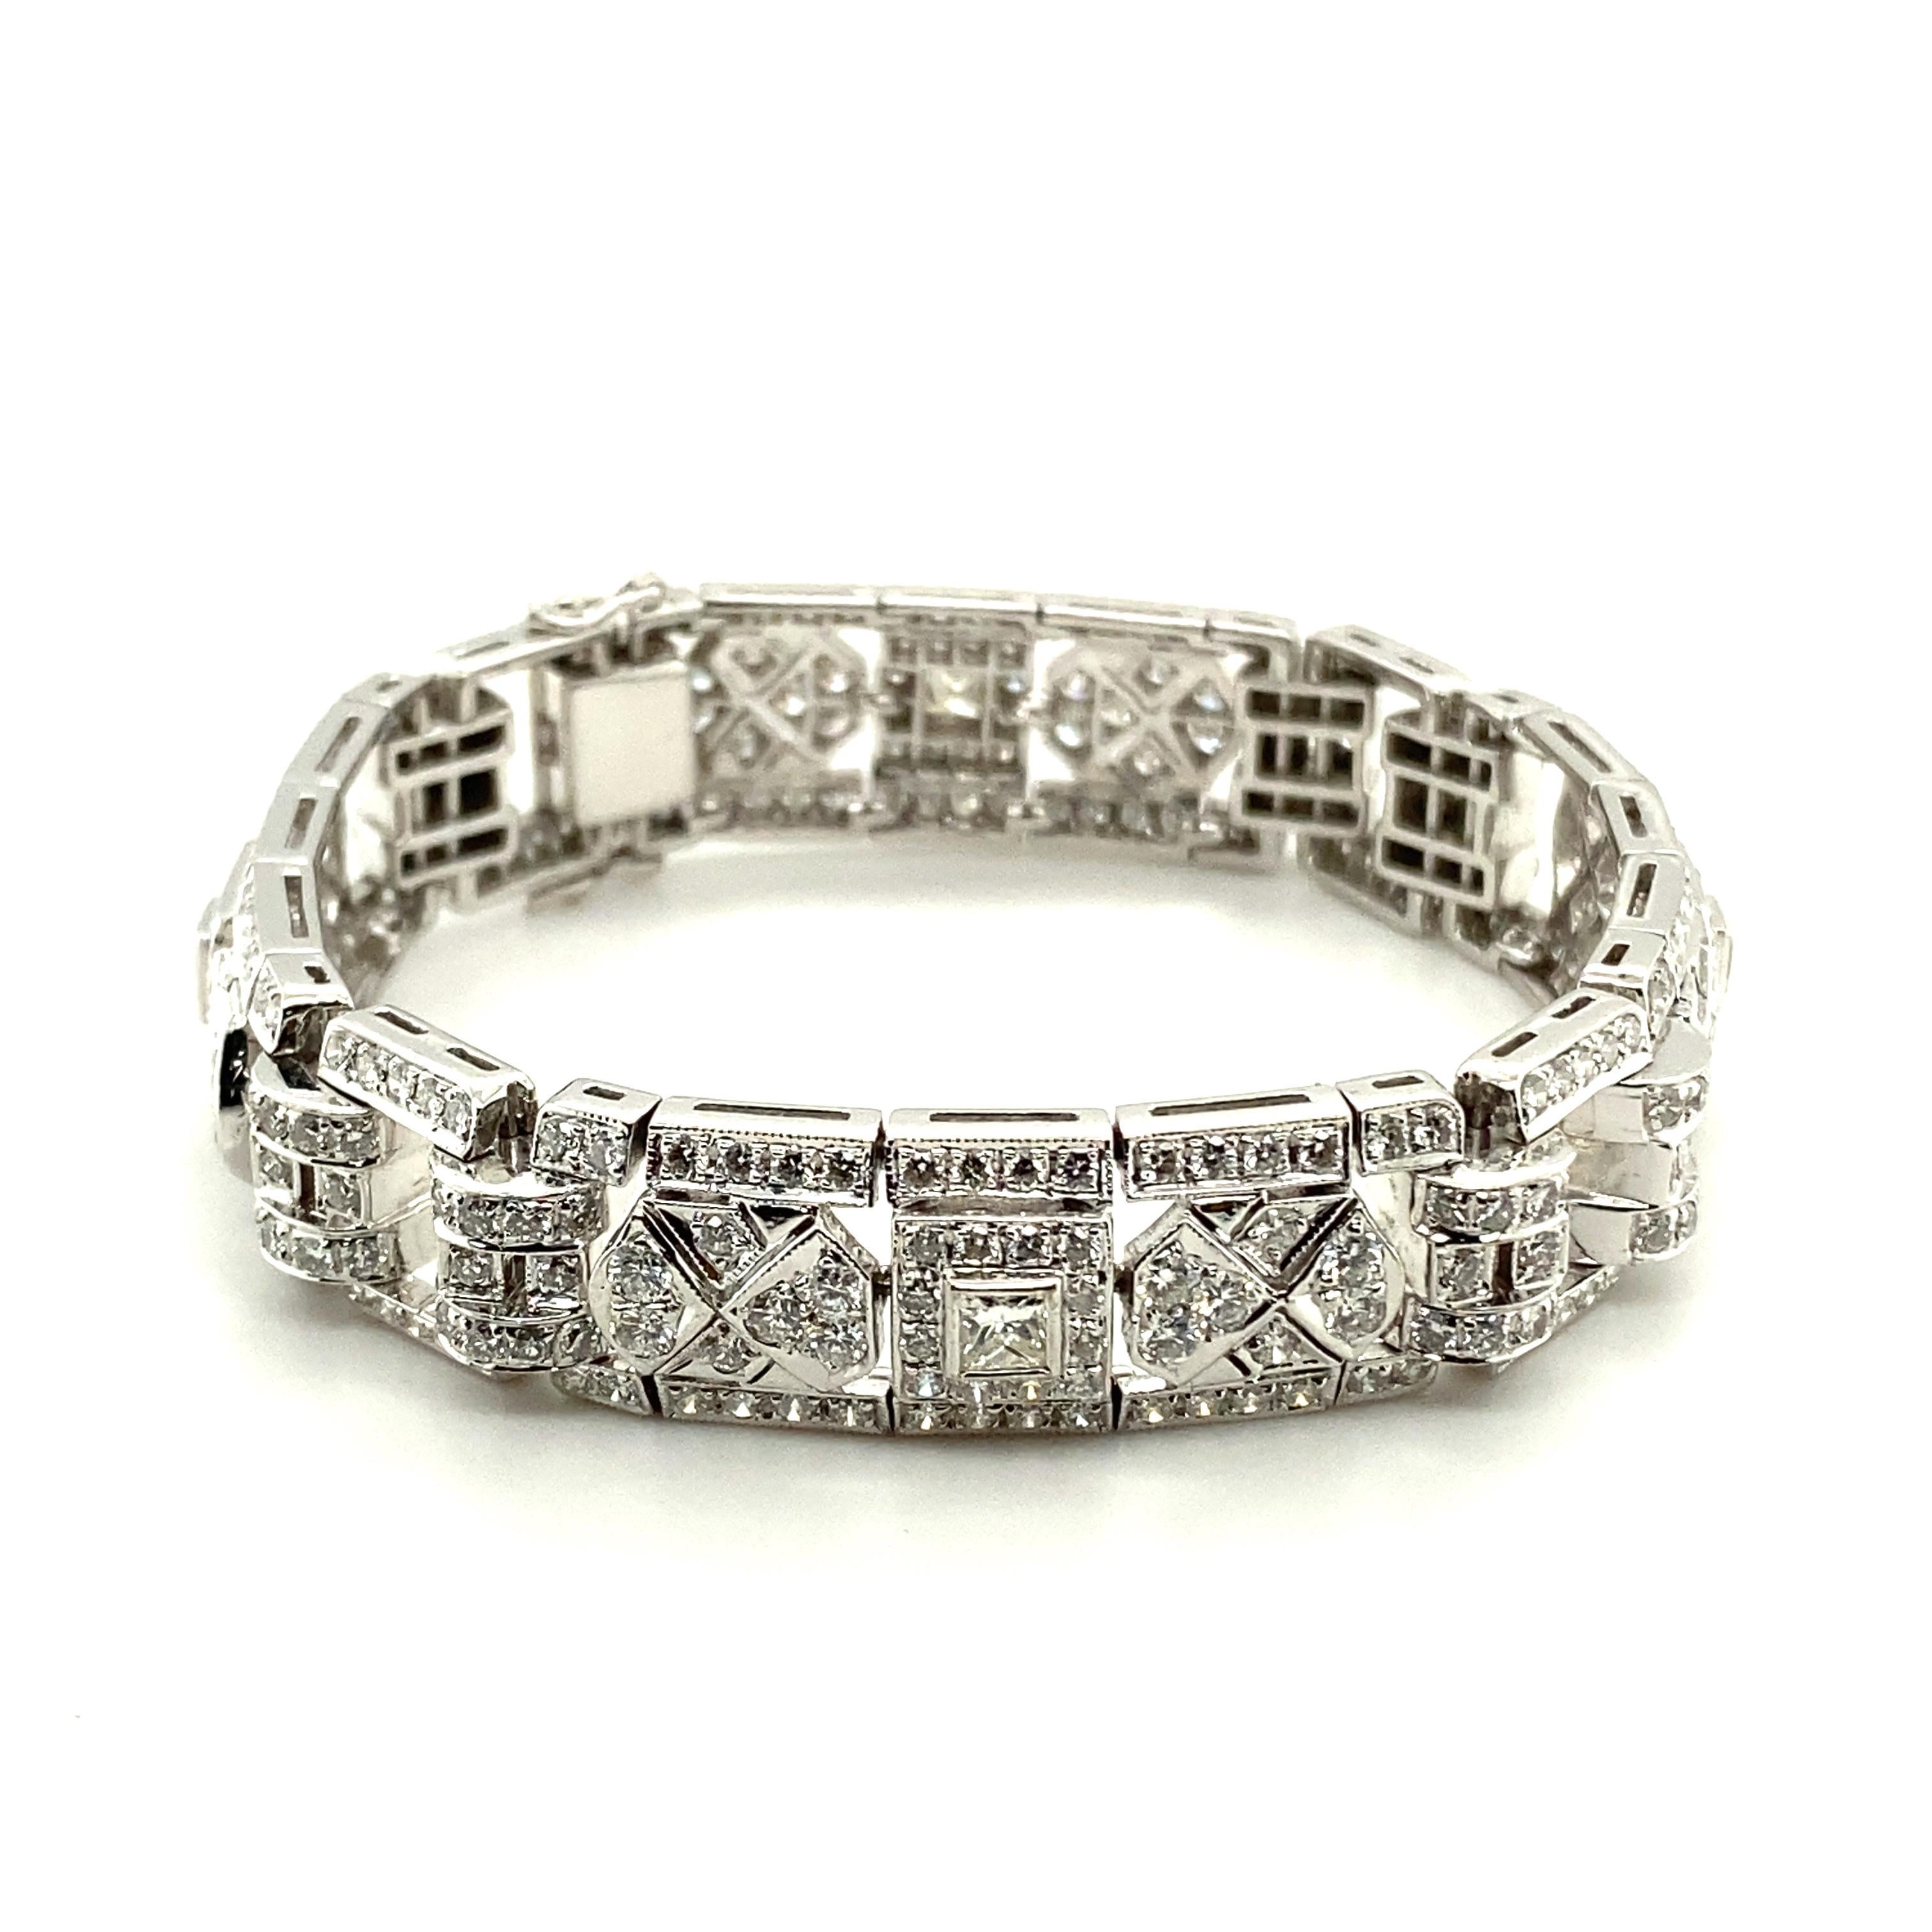 Art Deco style, geometric openwork design and mill grain decoration.
Set with 4 princess-cut diamonds totalling 0.60 ct, framed by 352 circular-cut diamonds totalling 6.10 ct.
The diamonds are of G/H colour and vs clarity. The great à jour work can